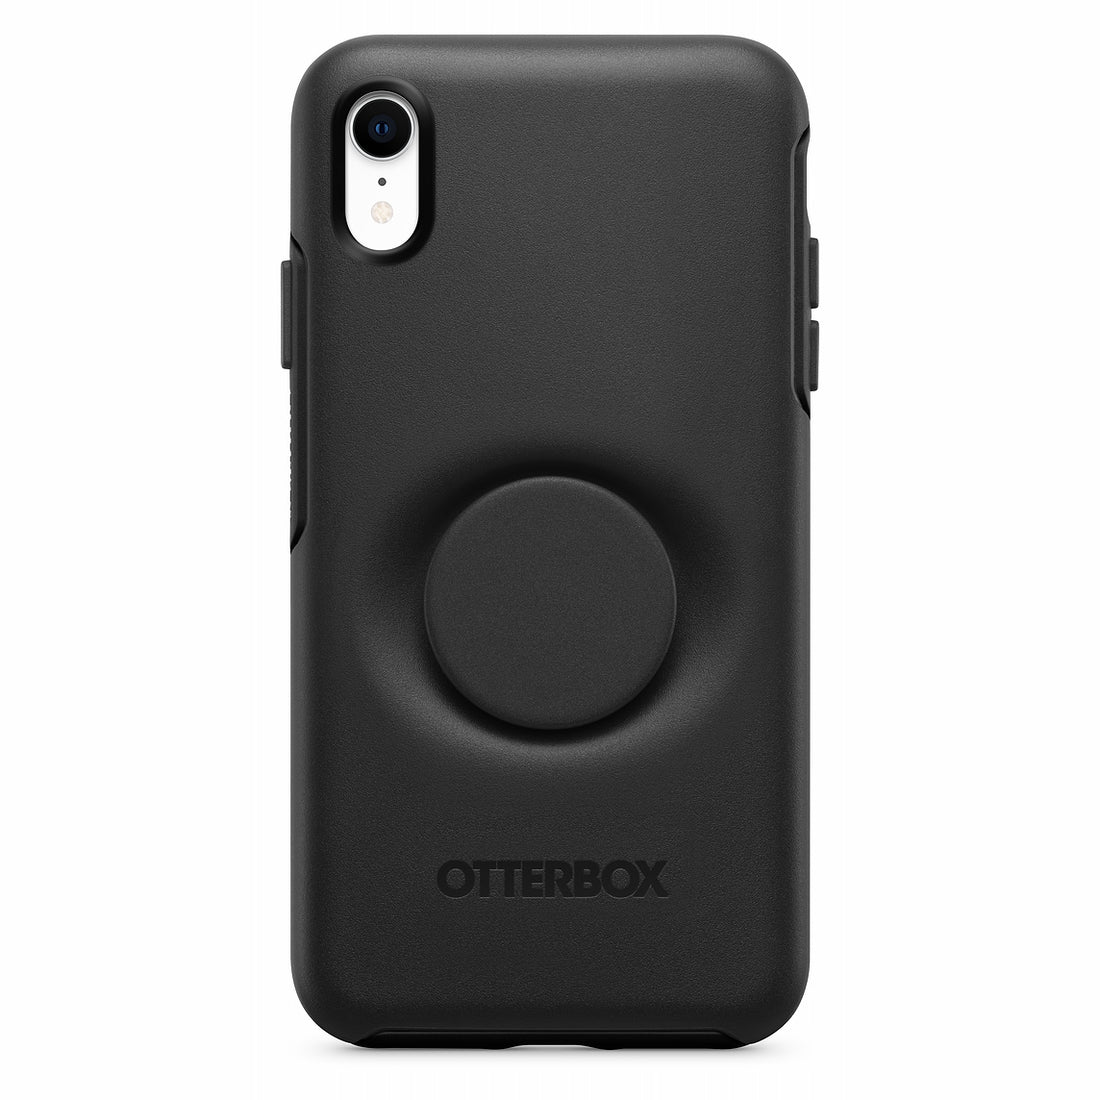 OtterBox + POP Case for Apple iPhone XR - Black (Certified Refurbished)